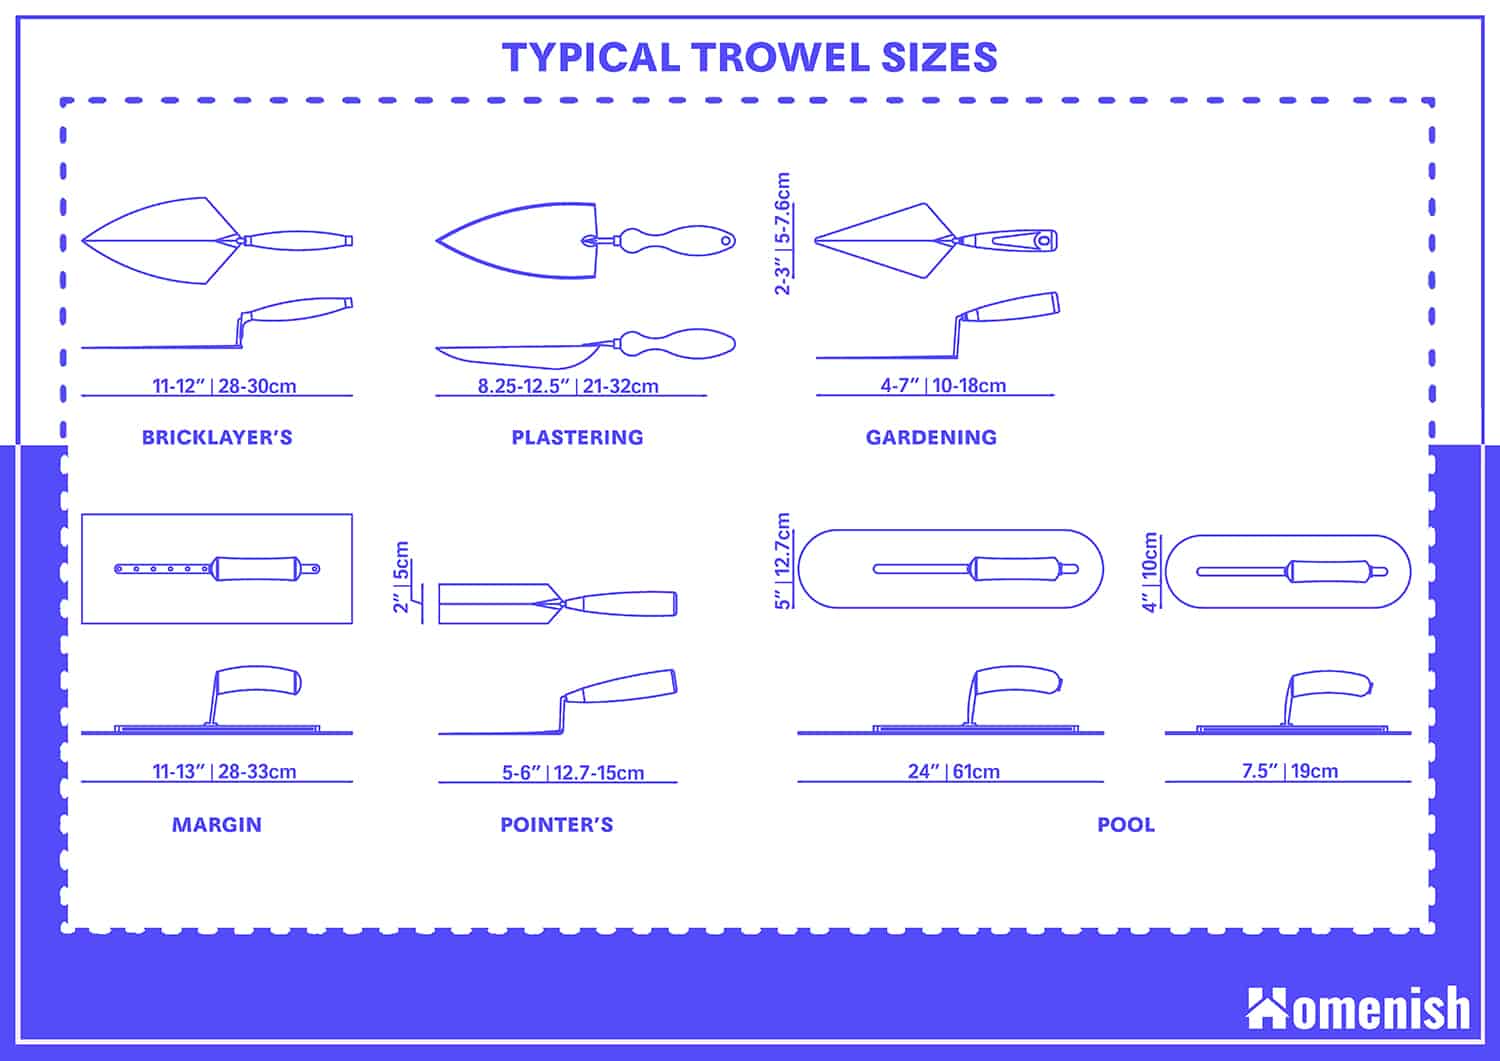 Typical Trowel Sizes